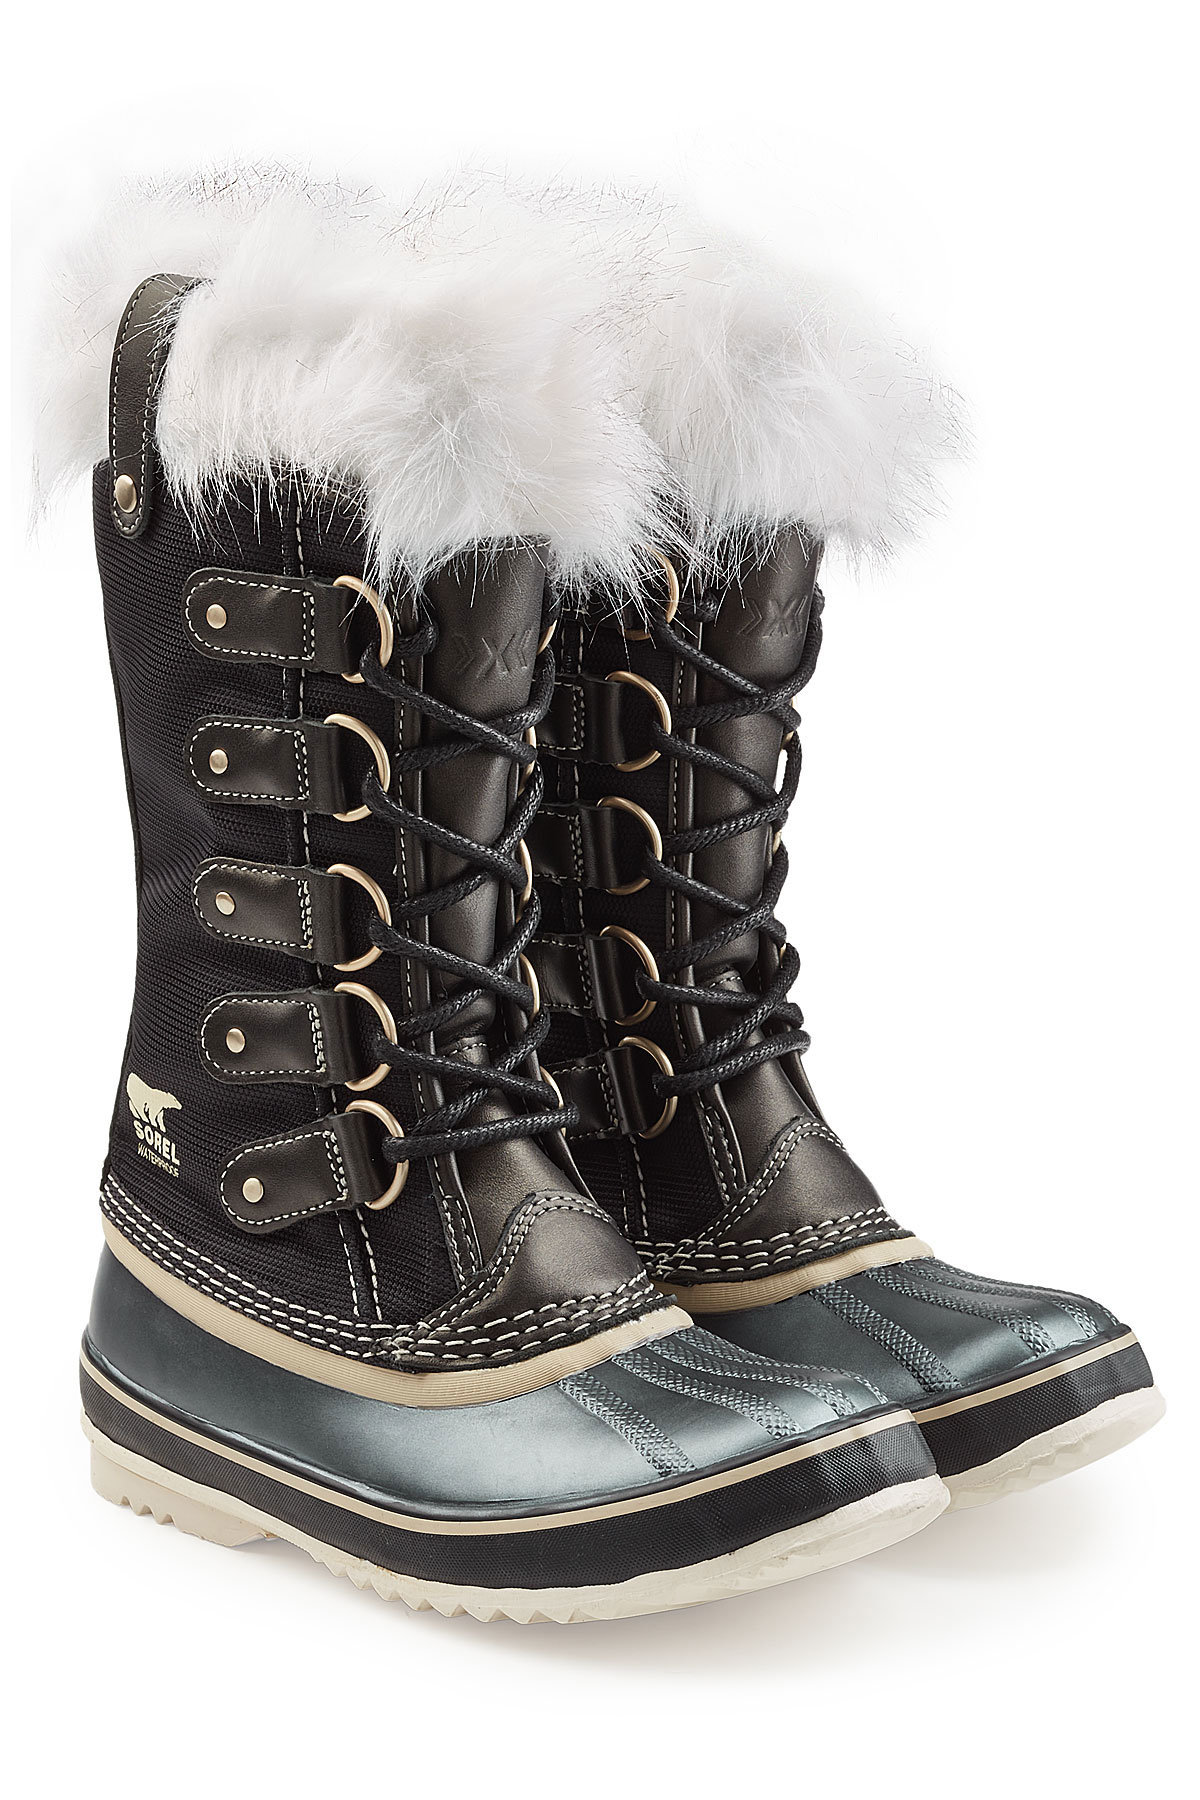 Sorel - Joan of Arctic x Celebration Leather Ankle Boots